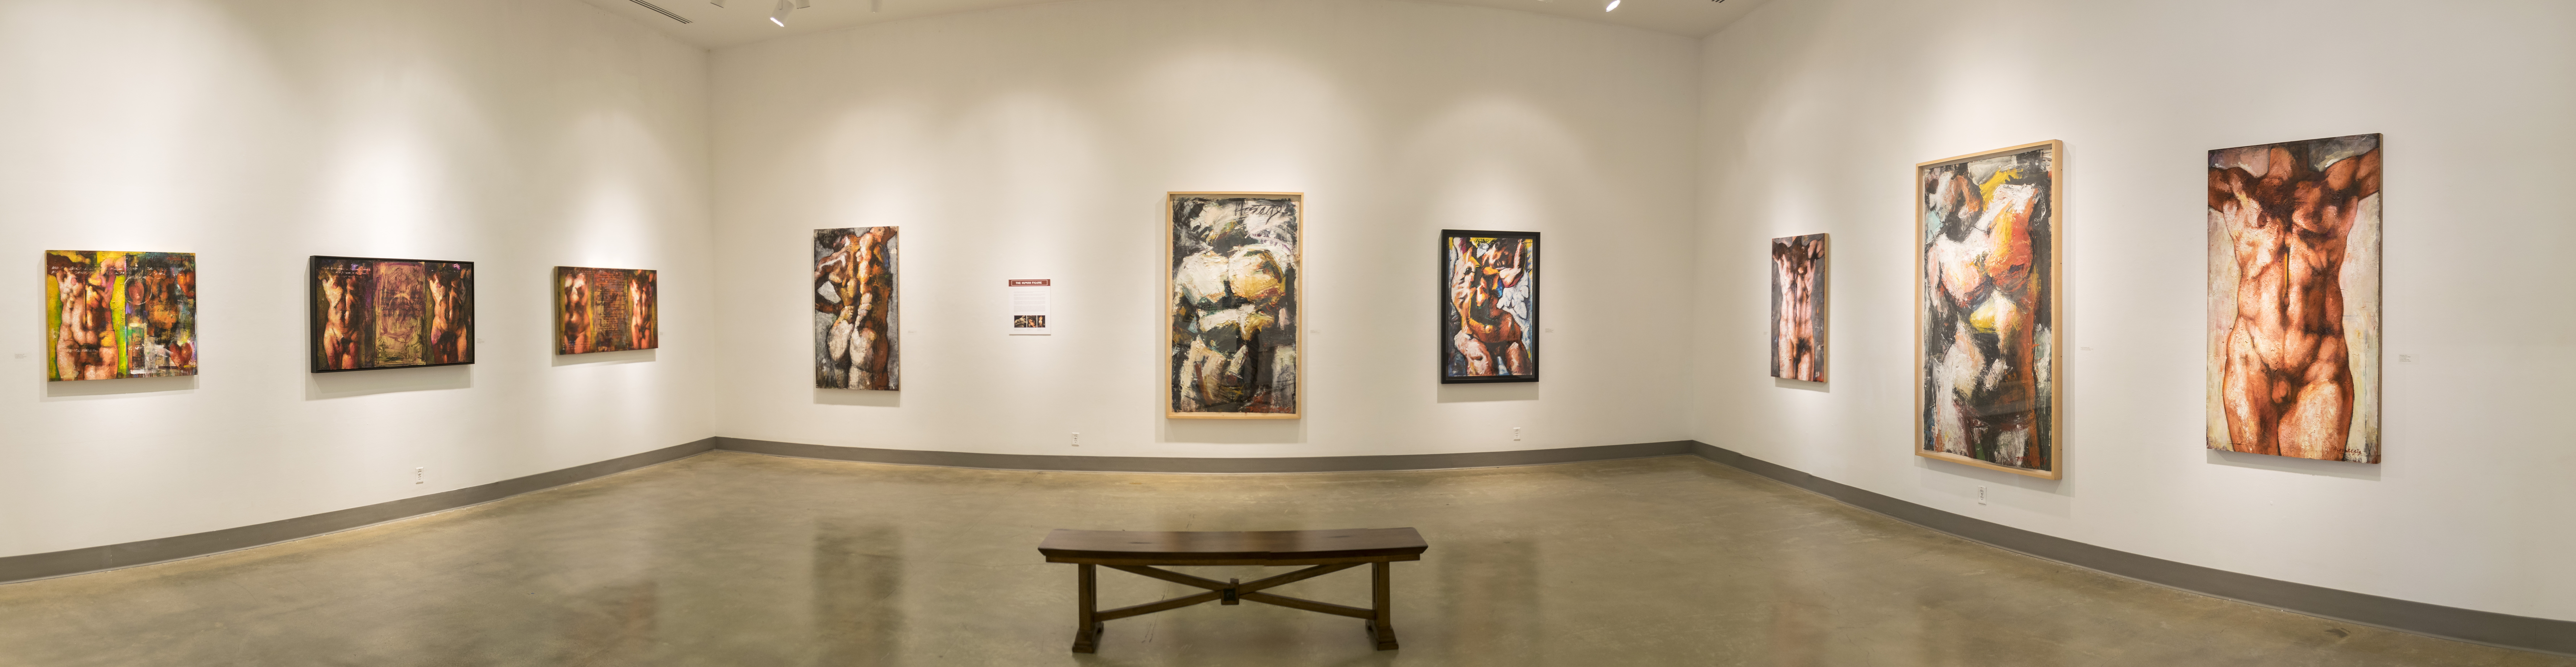 Eastside of front gallery, Exhibition: Jim Morphesis: Passion and Presence, Memento and Myth, Nov 18, 2017 - Feb 1, 2018, Curator: Michele Cairella Fillmore, W. Keith & Janet Kellogg Art Gallery, Cal Poly Pomona. [Panoramic of the South gallery]